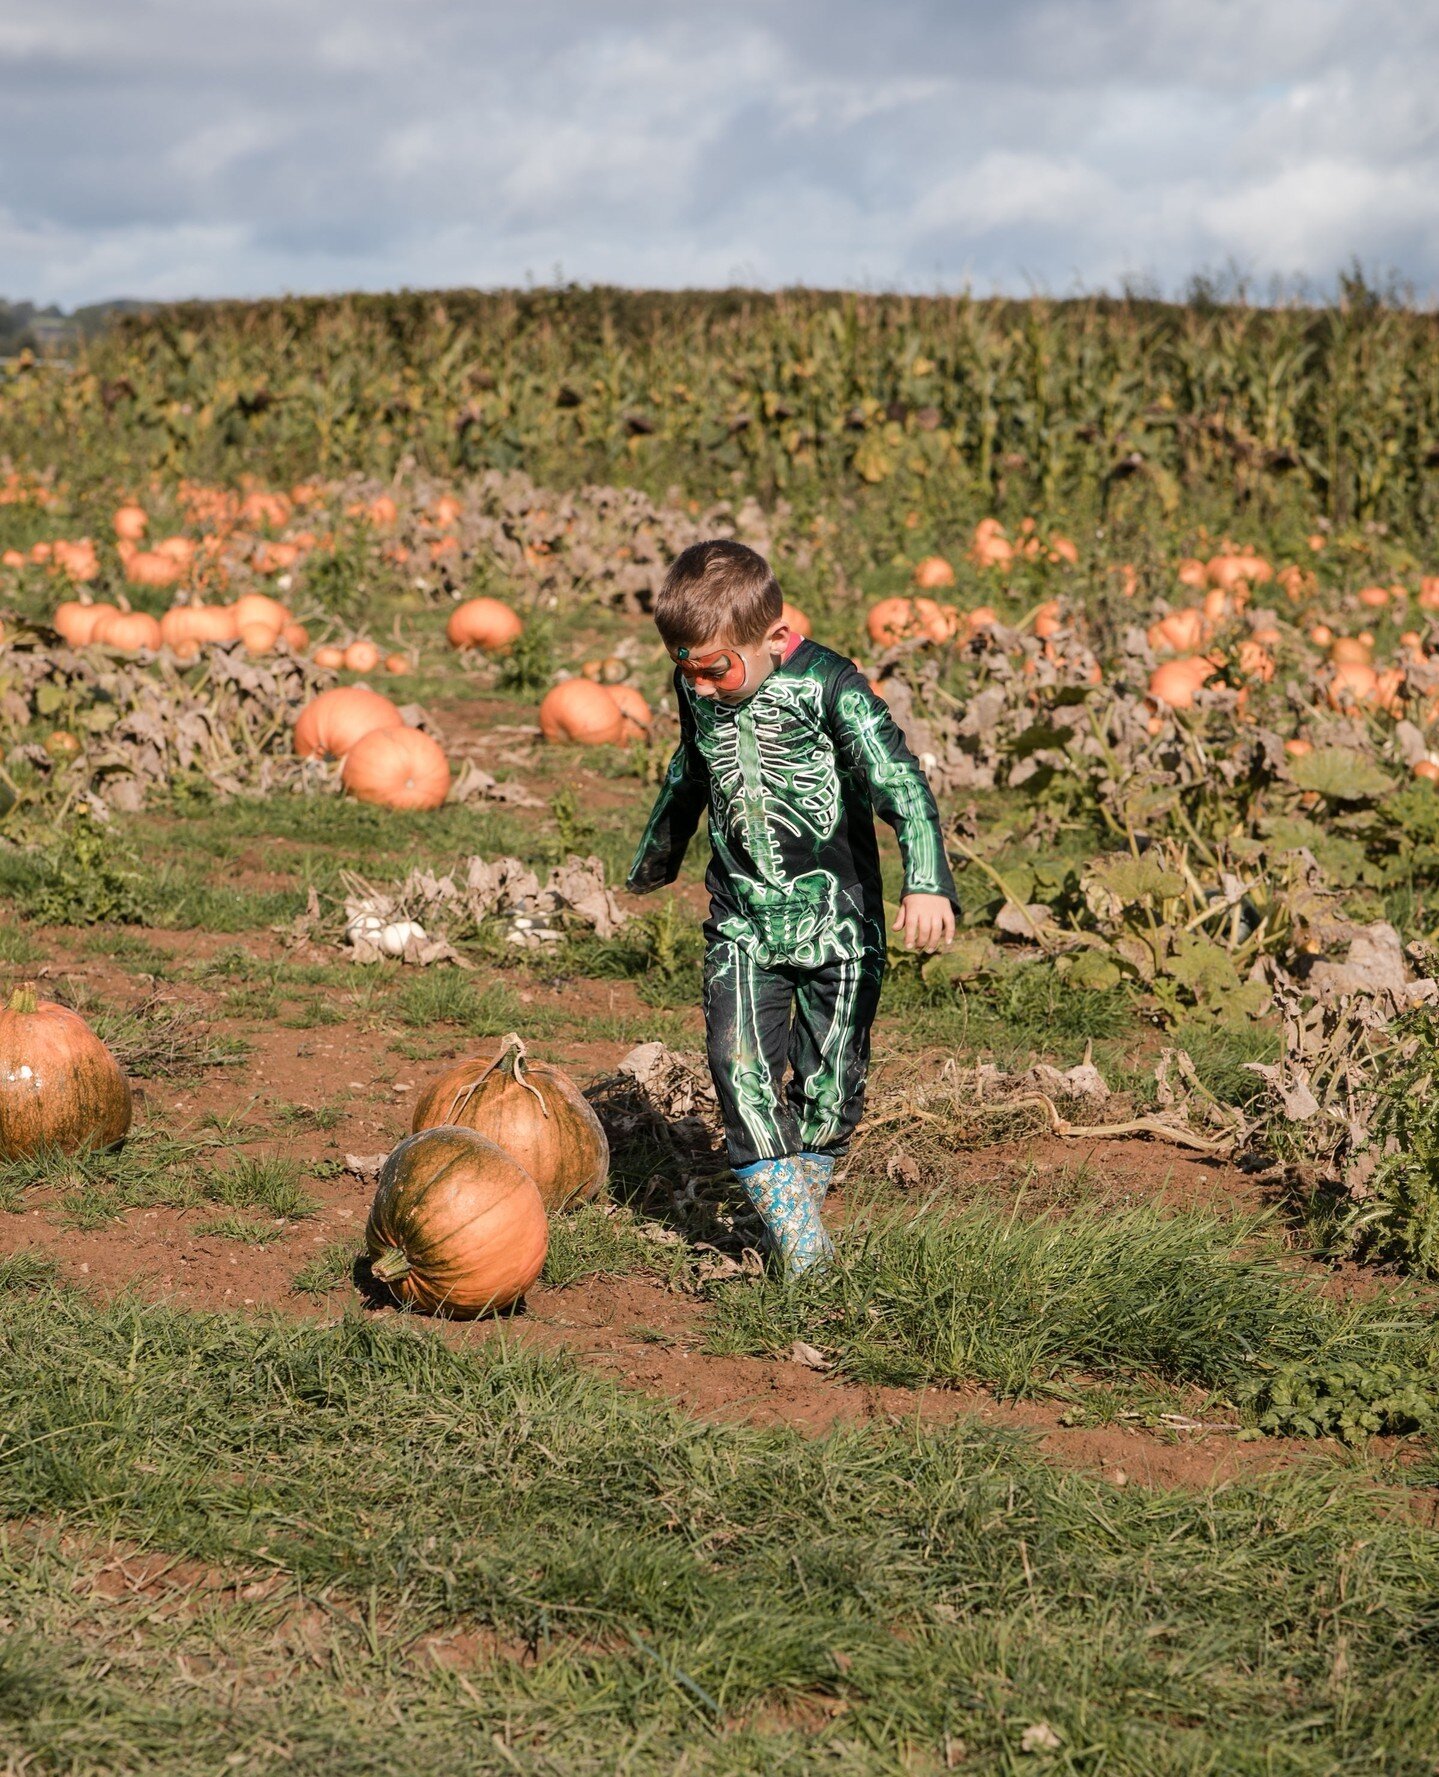 Don't miss the last chance to visit The Pumpkin Patch this weekend! 🎃⁠
⁠
We have everything you need to enjoy a fun-filled day with your family and friends, including pumpkin picking, delicious pizza, face painting, skittles, and more. The Patch is 